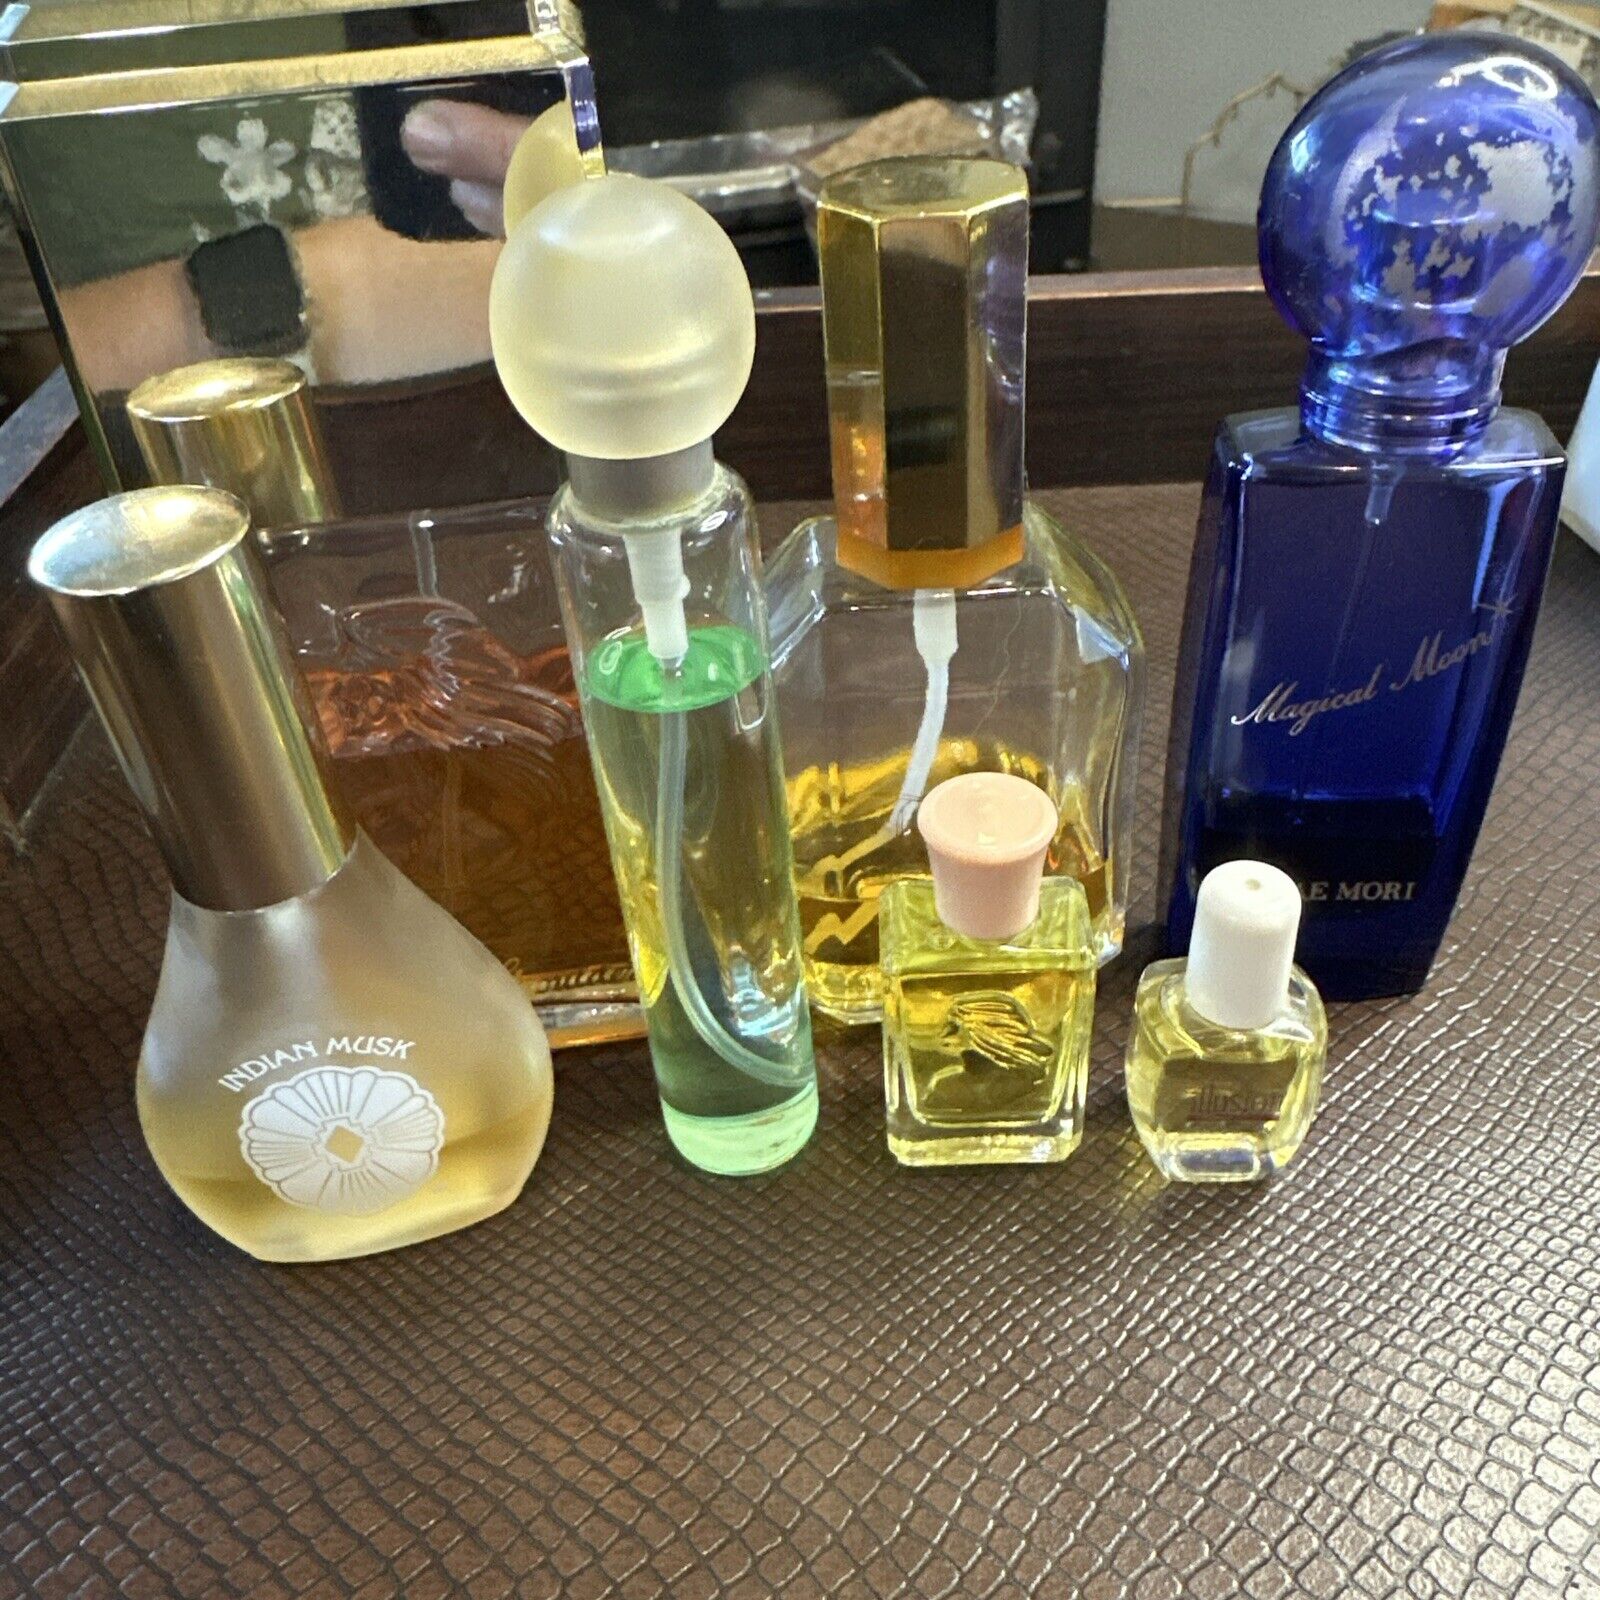 Lot of 7 Vintage Perfumes/Cologne Indian Musk, Magical Moon Topaze, Jovan -Read-